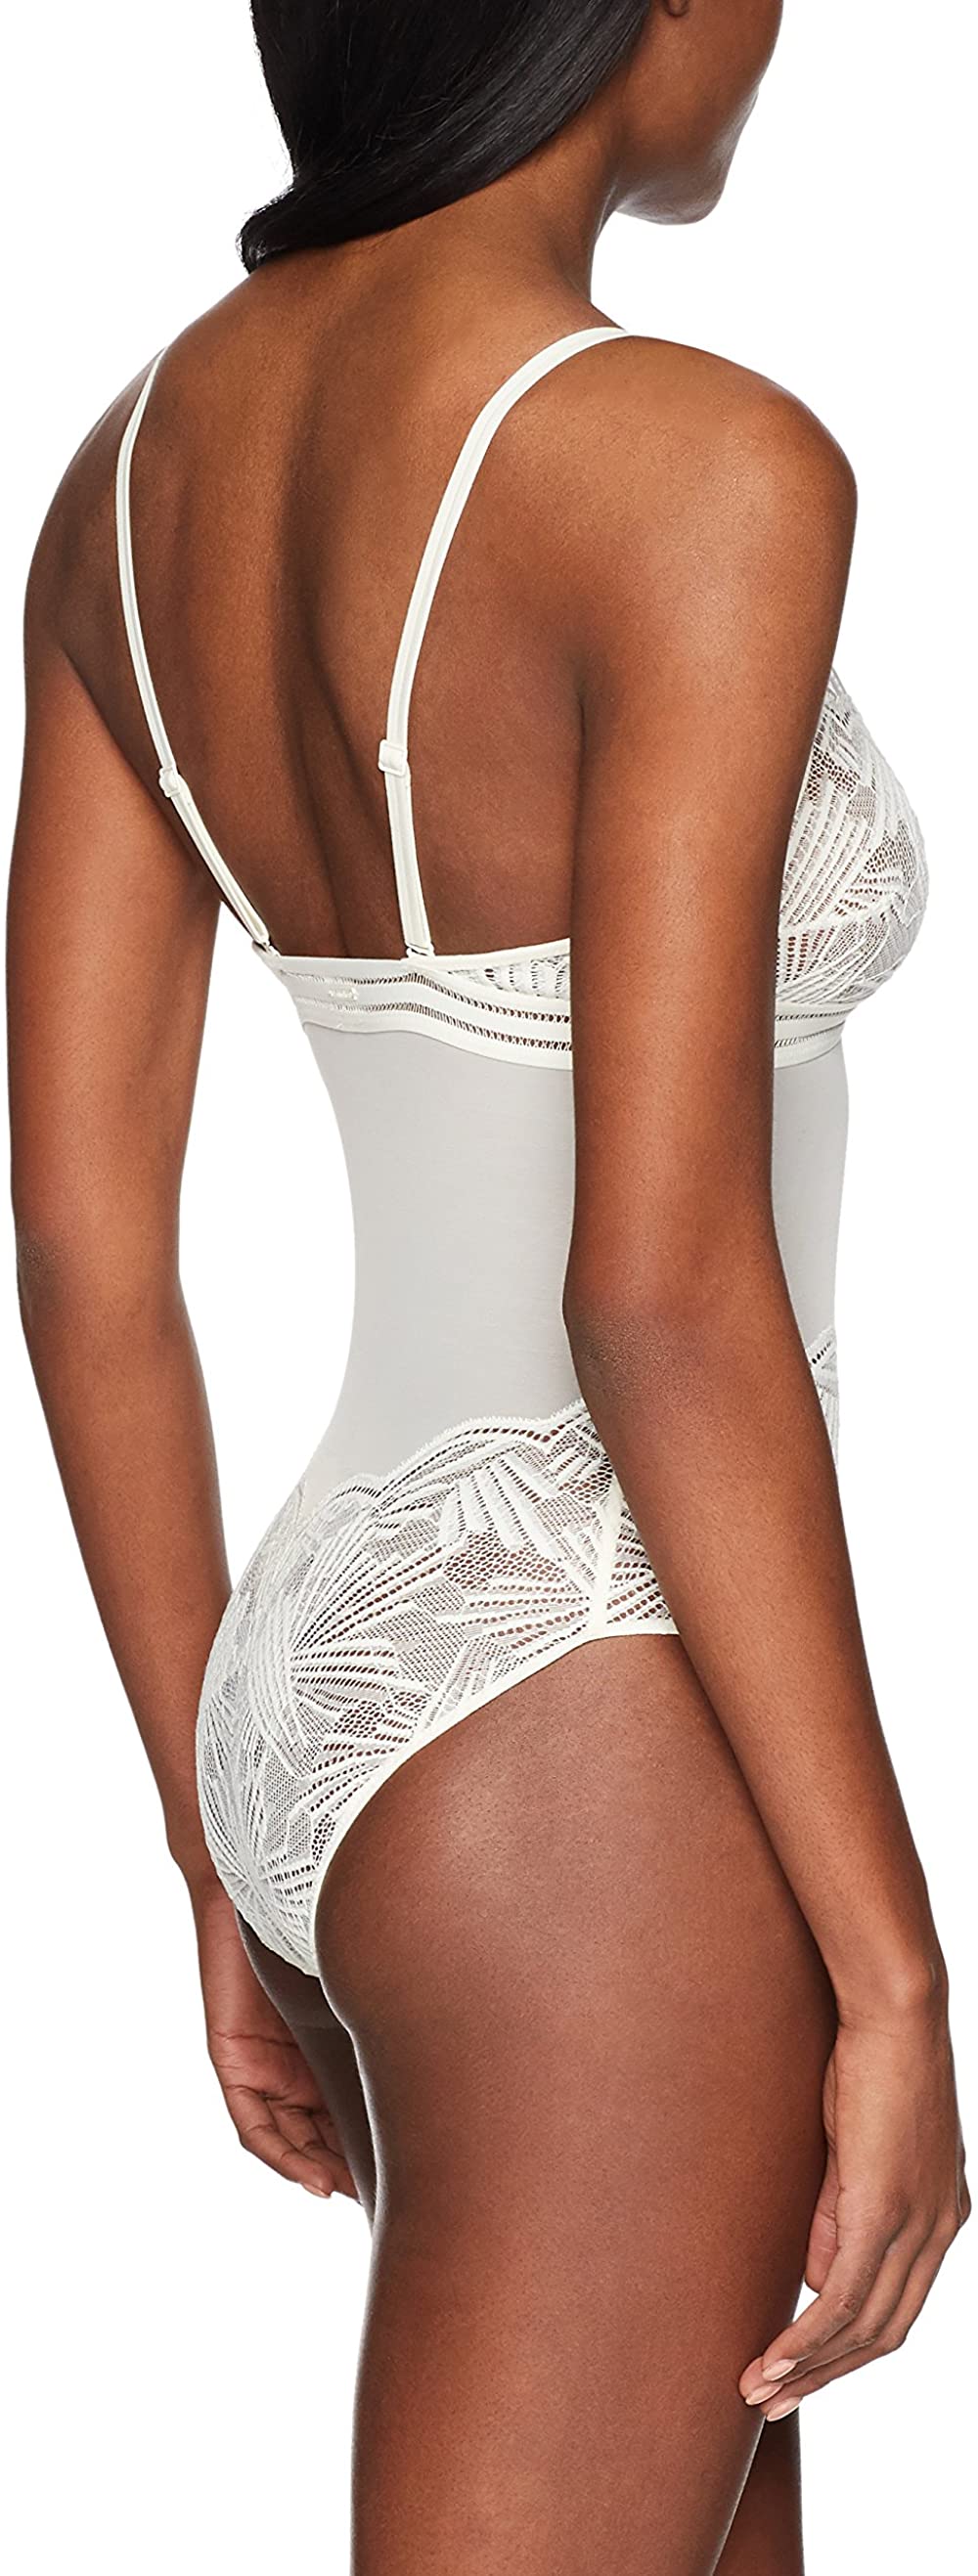 Calvin Klein Womens Perfectly Fit Mesh And Lace Bodysuit